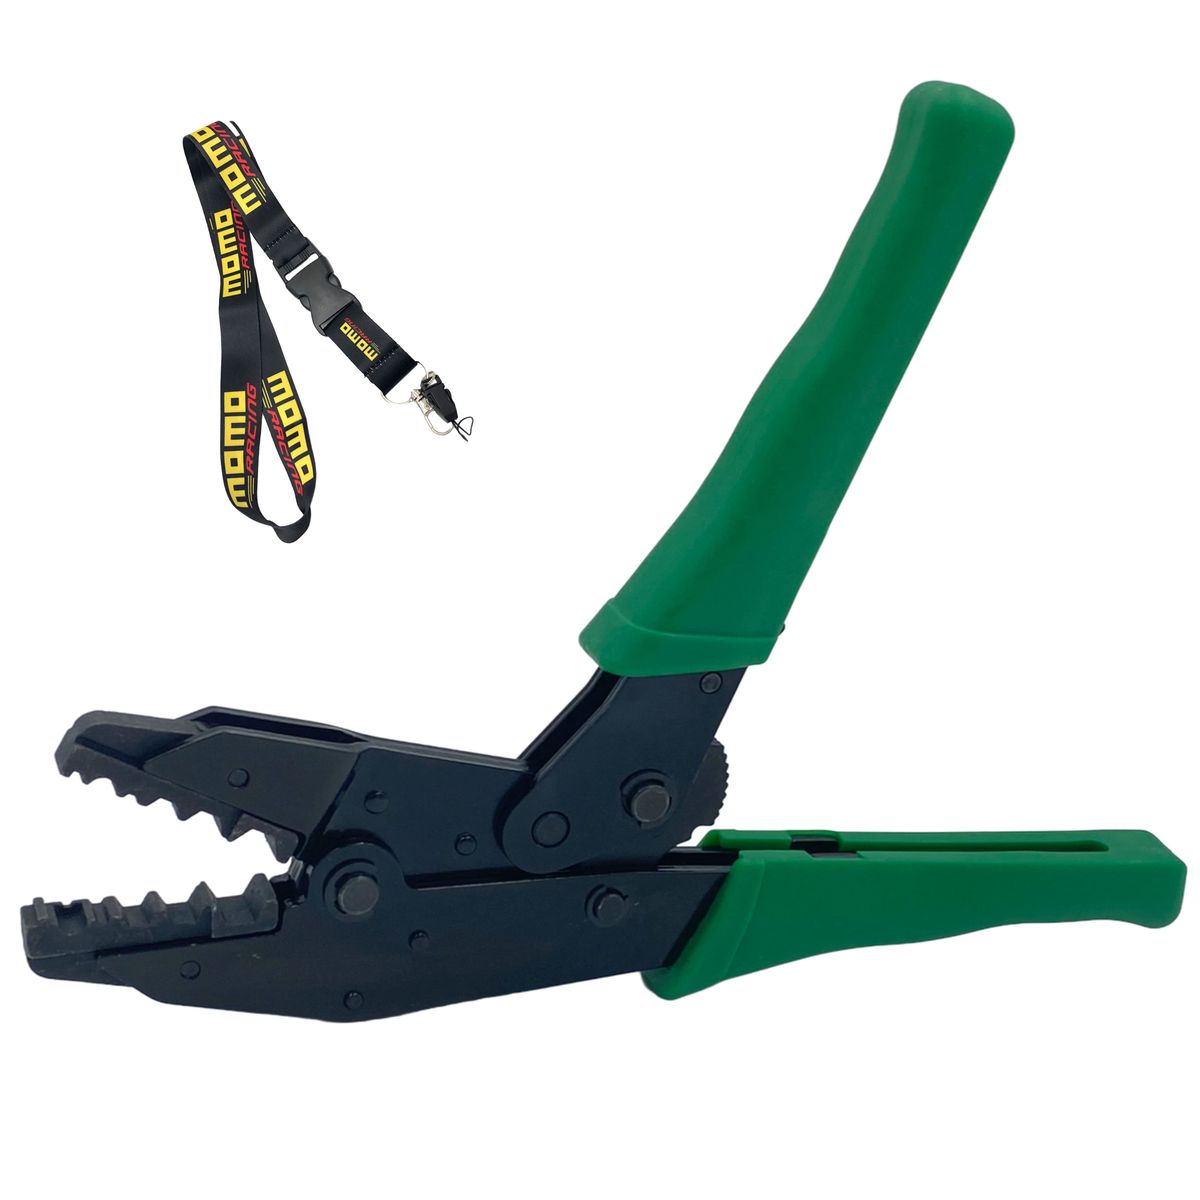 Adjustable Jaws Hand Crimping Tool For Terminals & Connectors With Lanyard